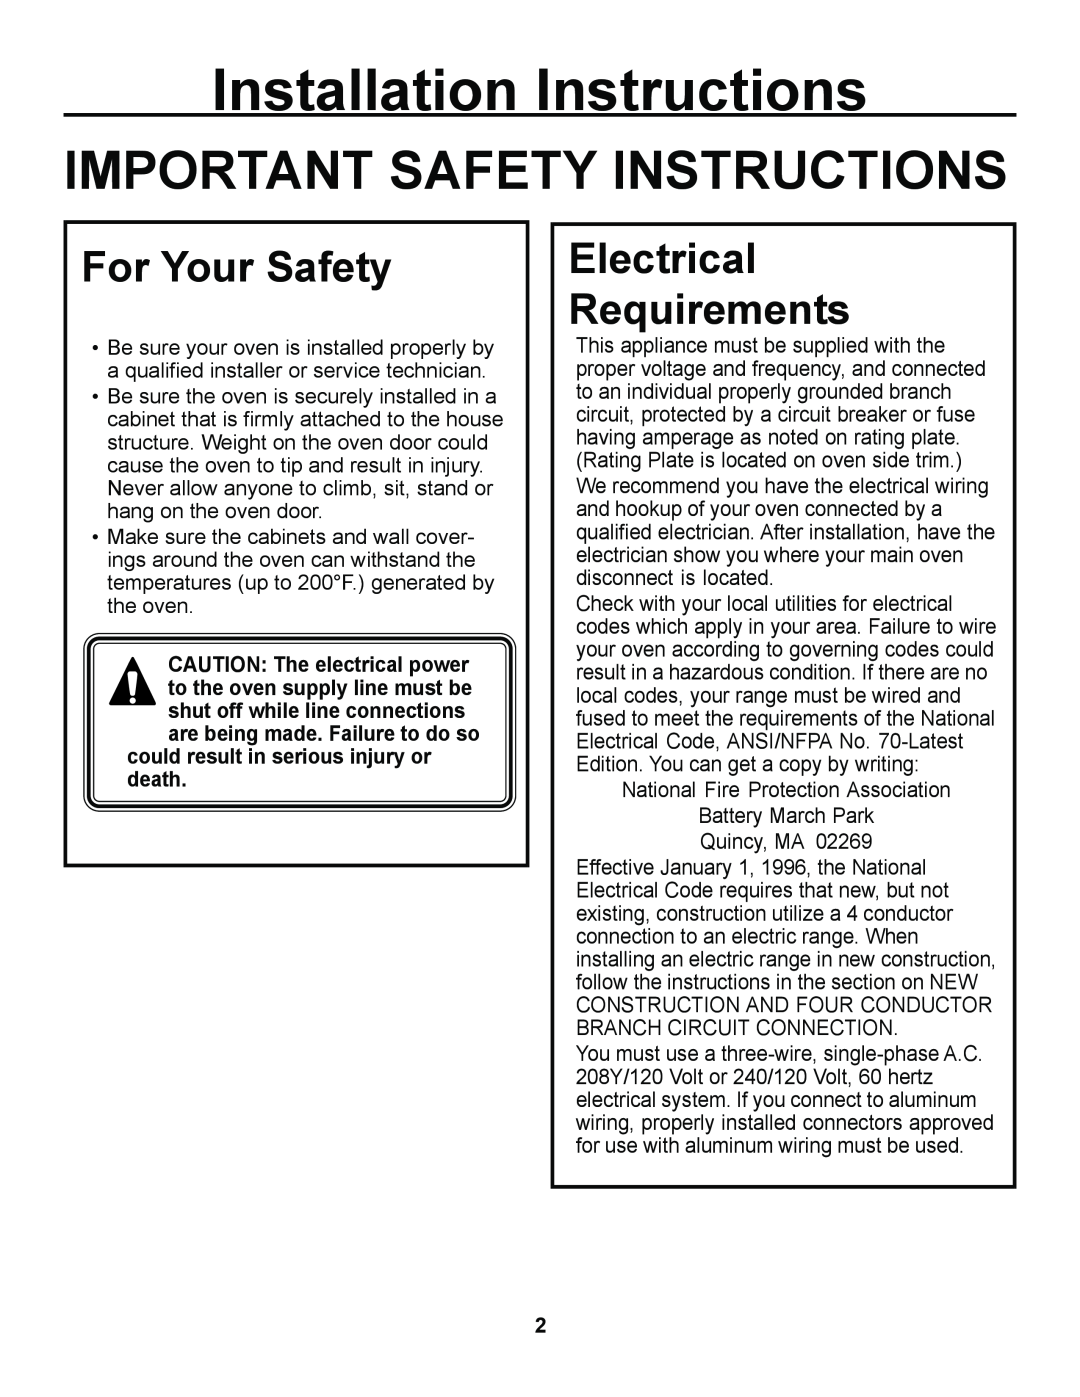 Cowon Systems JKP85 Installation Instructions, Important Safety Instructions, For Your Safety, Electrical Requirements 